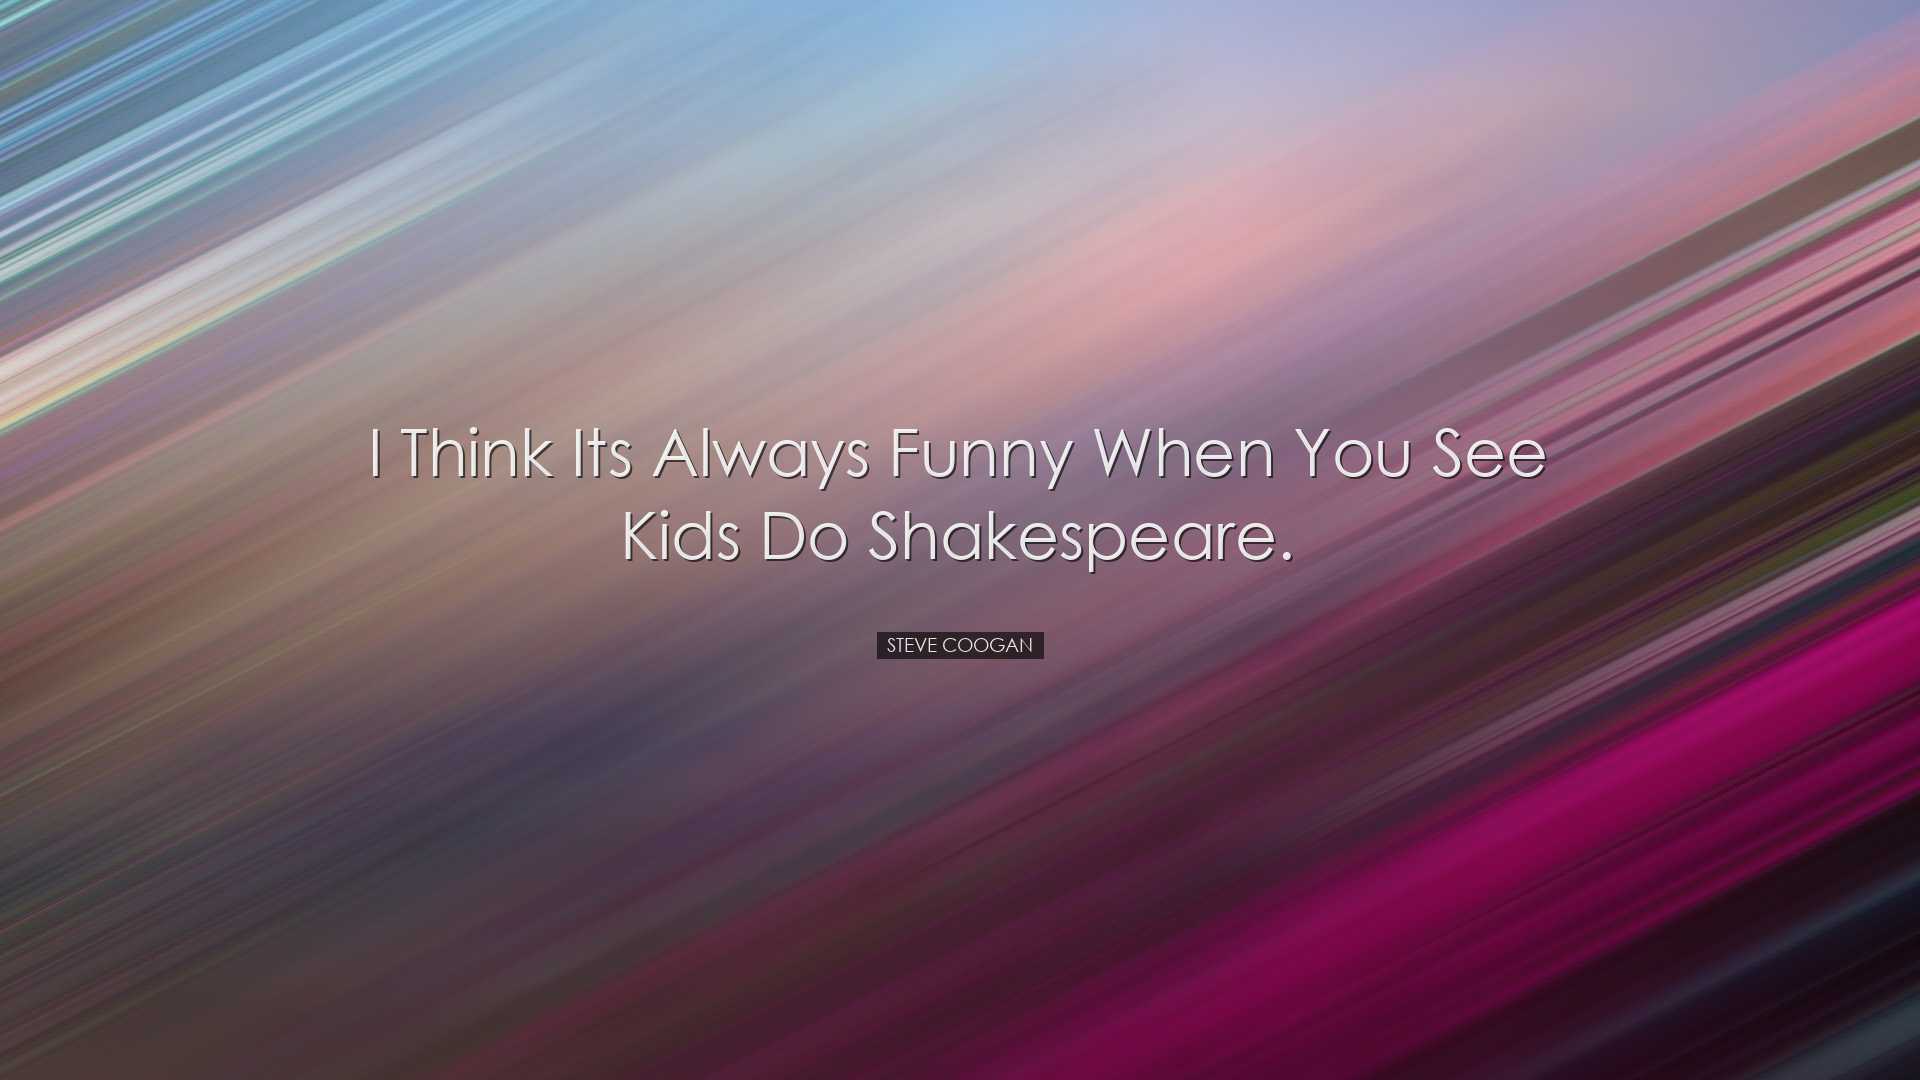 I think its always funny when you see kids do Shakespeare. - Steve